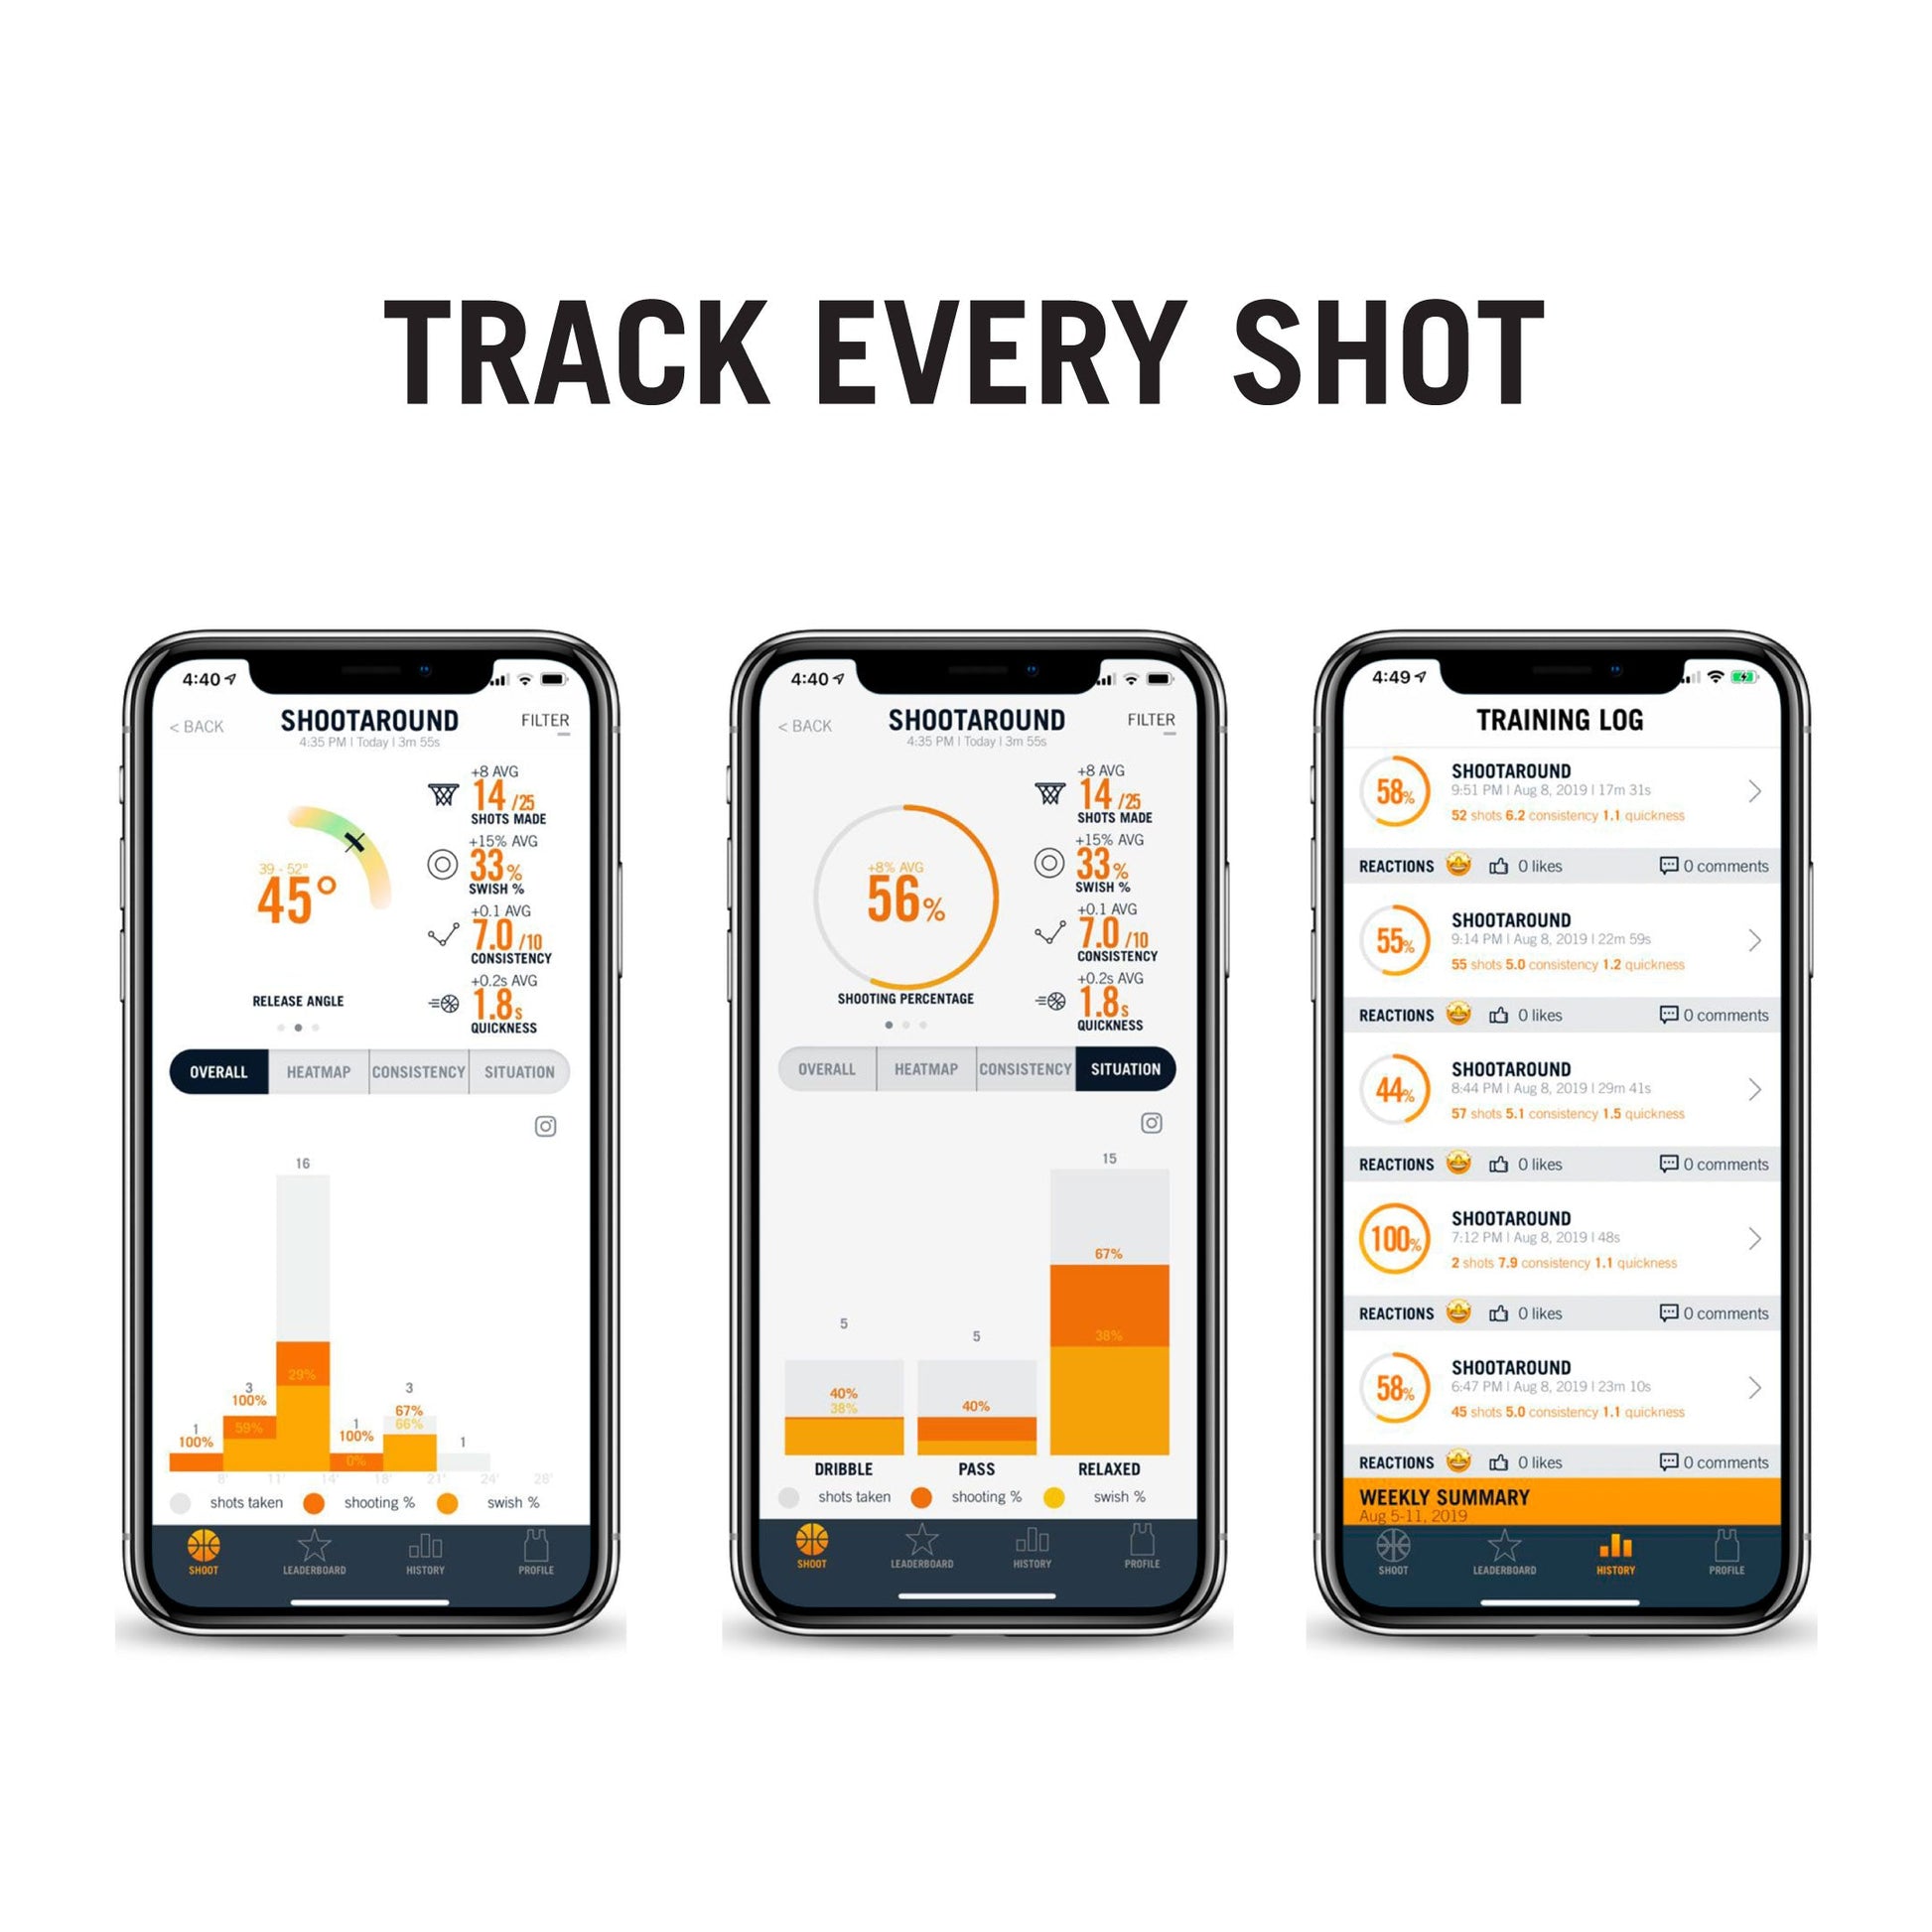 "Track every shot" with screenshots of the SIQ Basketball app